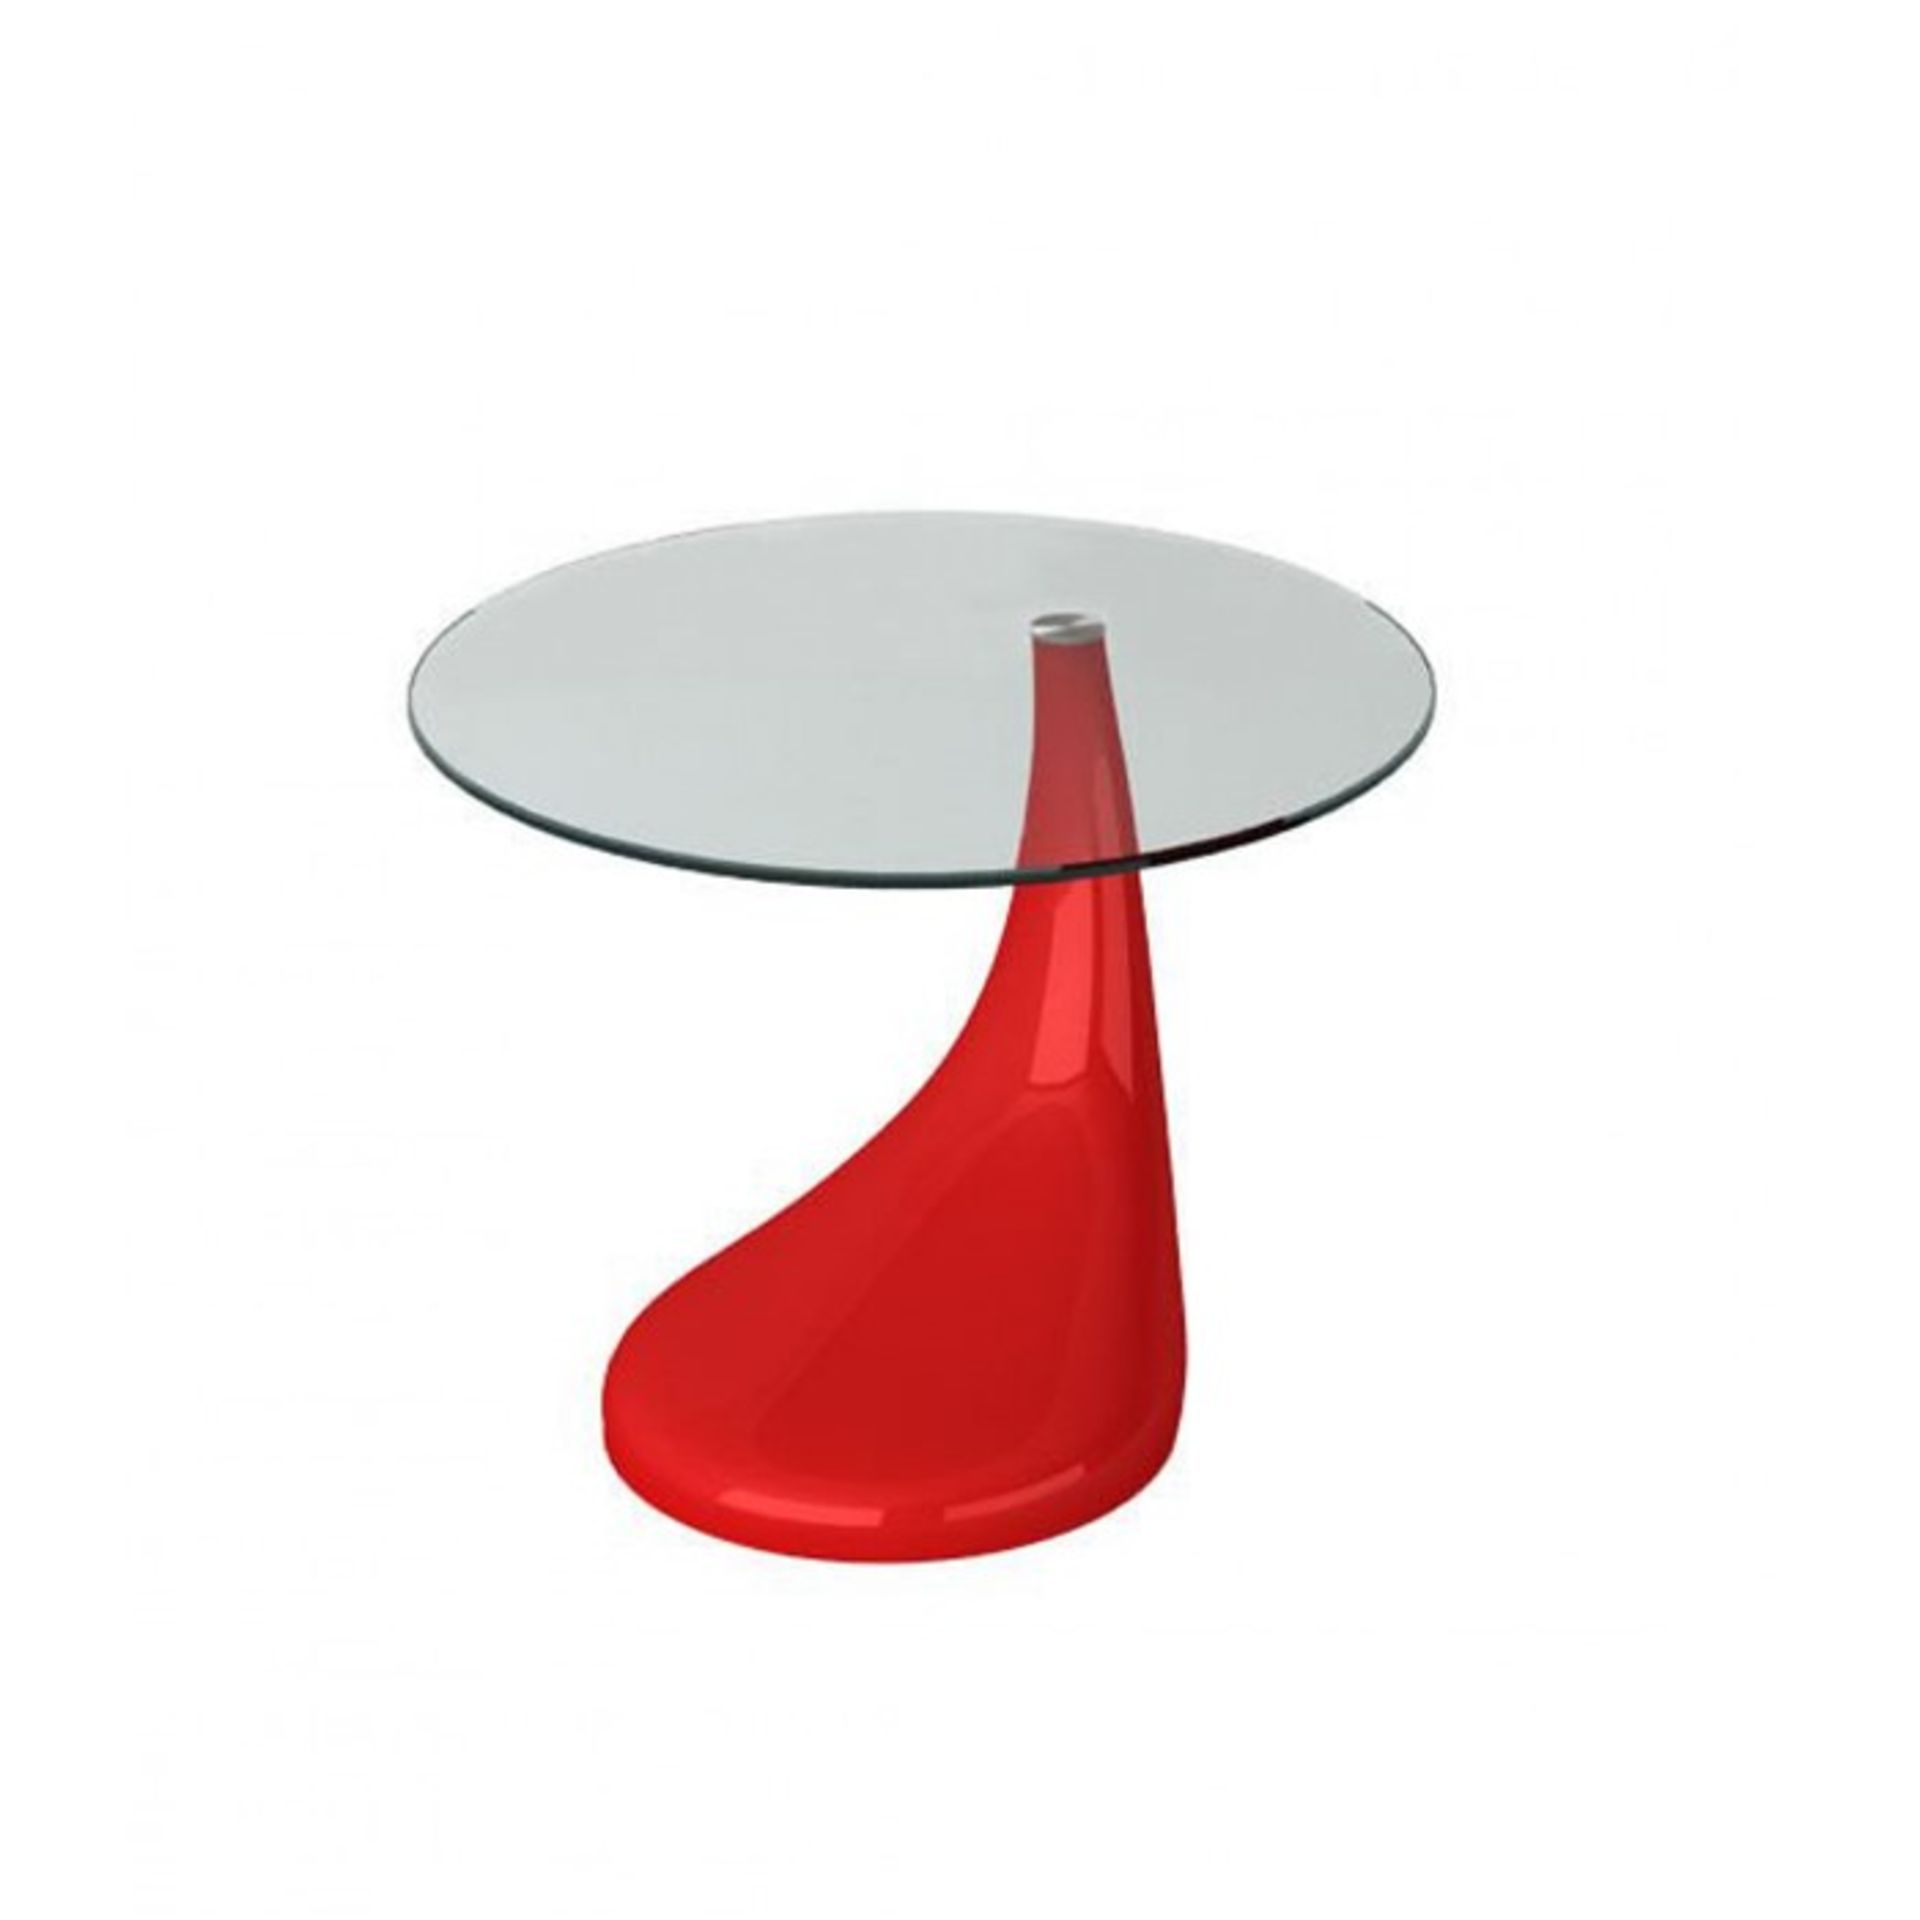 1 AS NEW BOXED TEAR DROP SHAPED RED GLOSS COFFEE/SIDE TABLE / CTB415RED